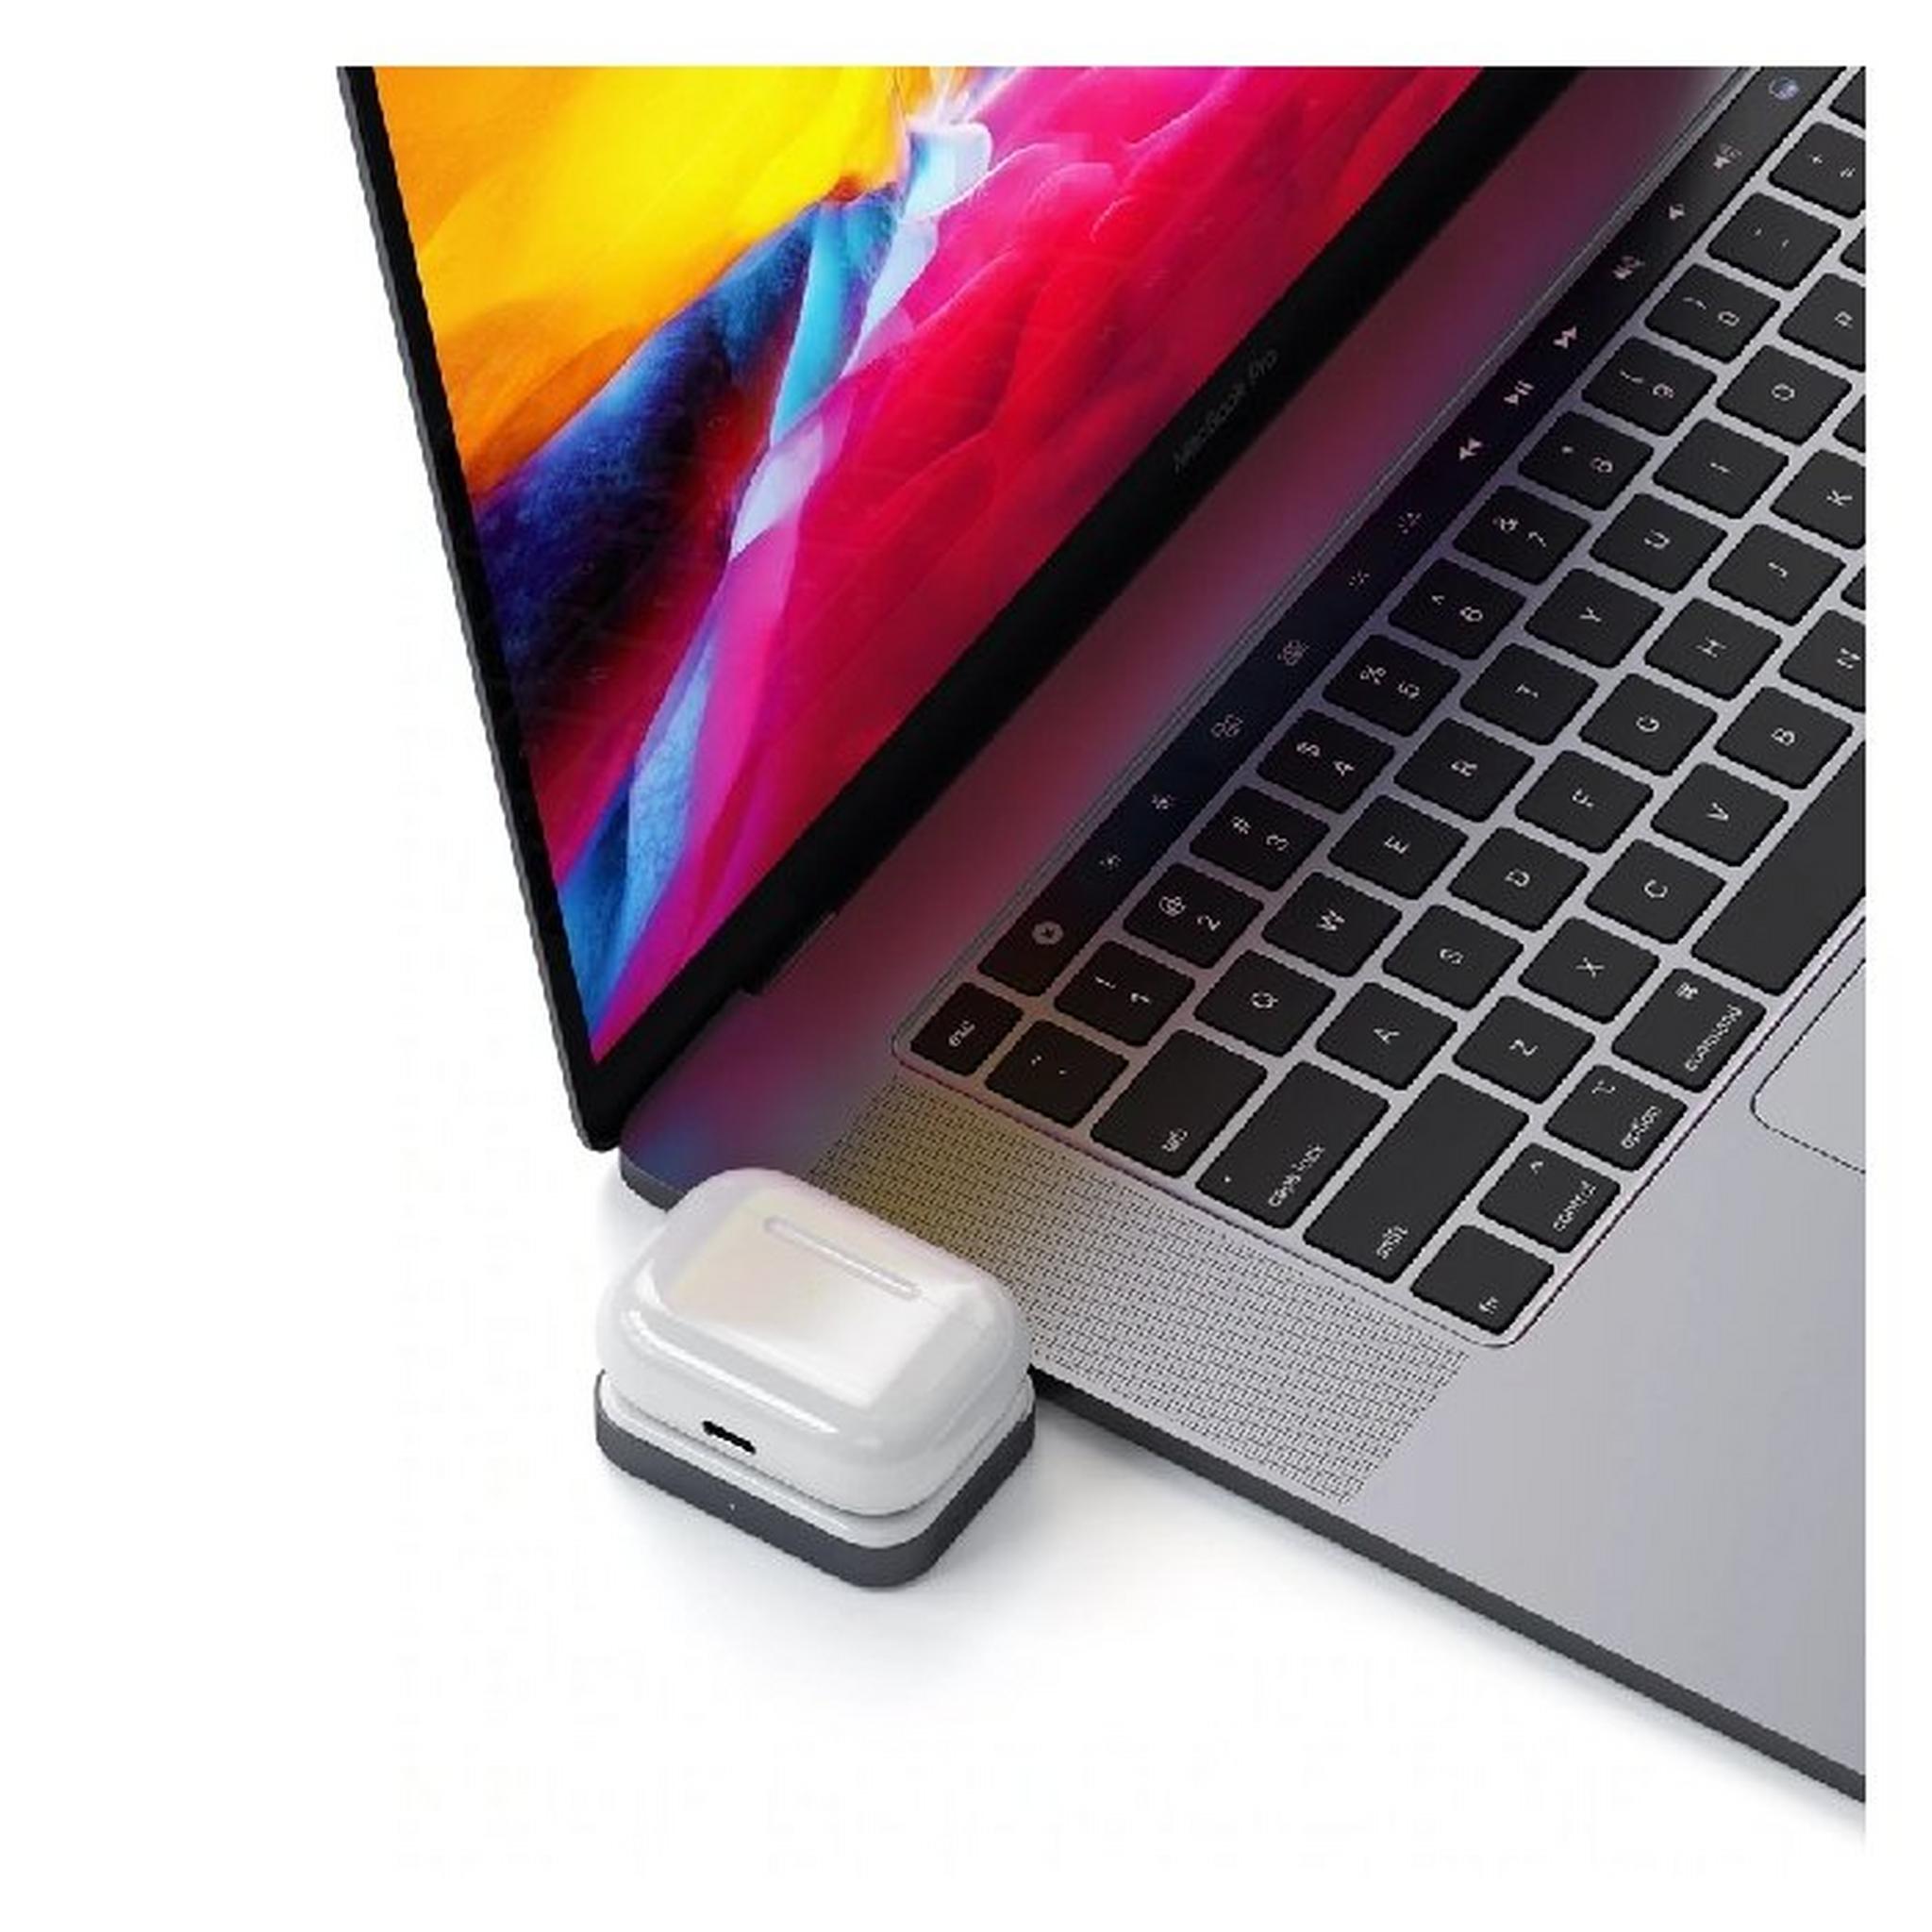 Satechi USB-C Wireless Charging Dock for Airpods  - Space Grey